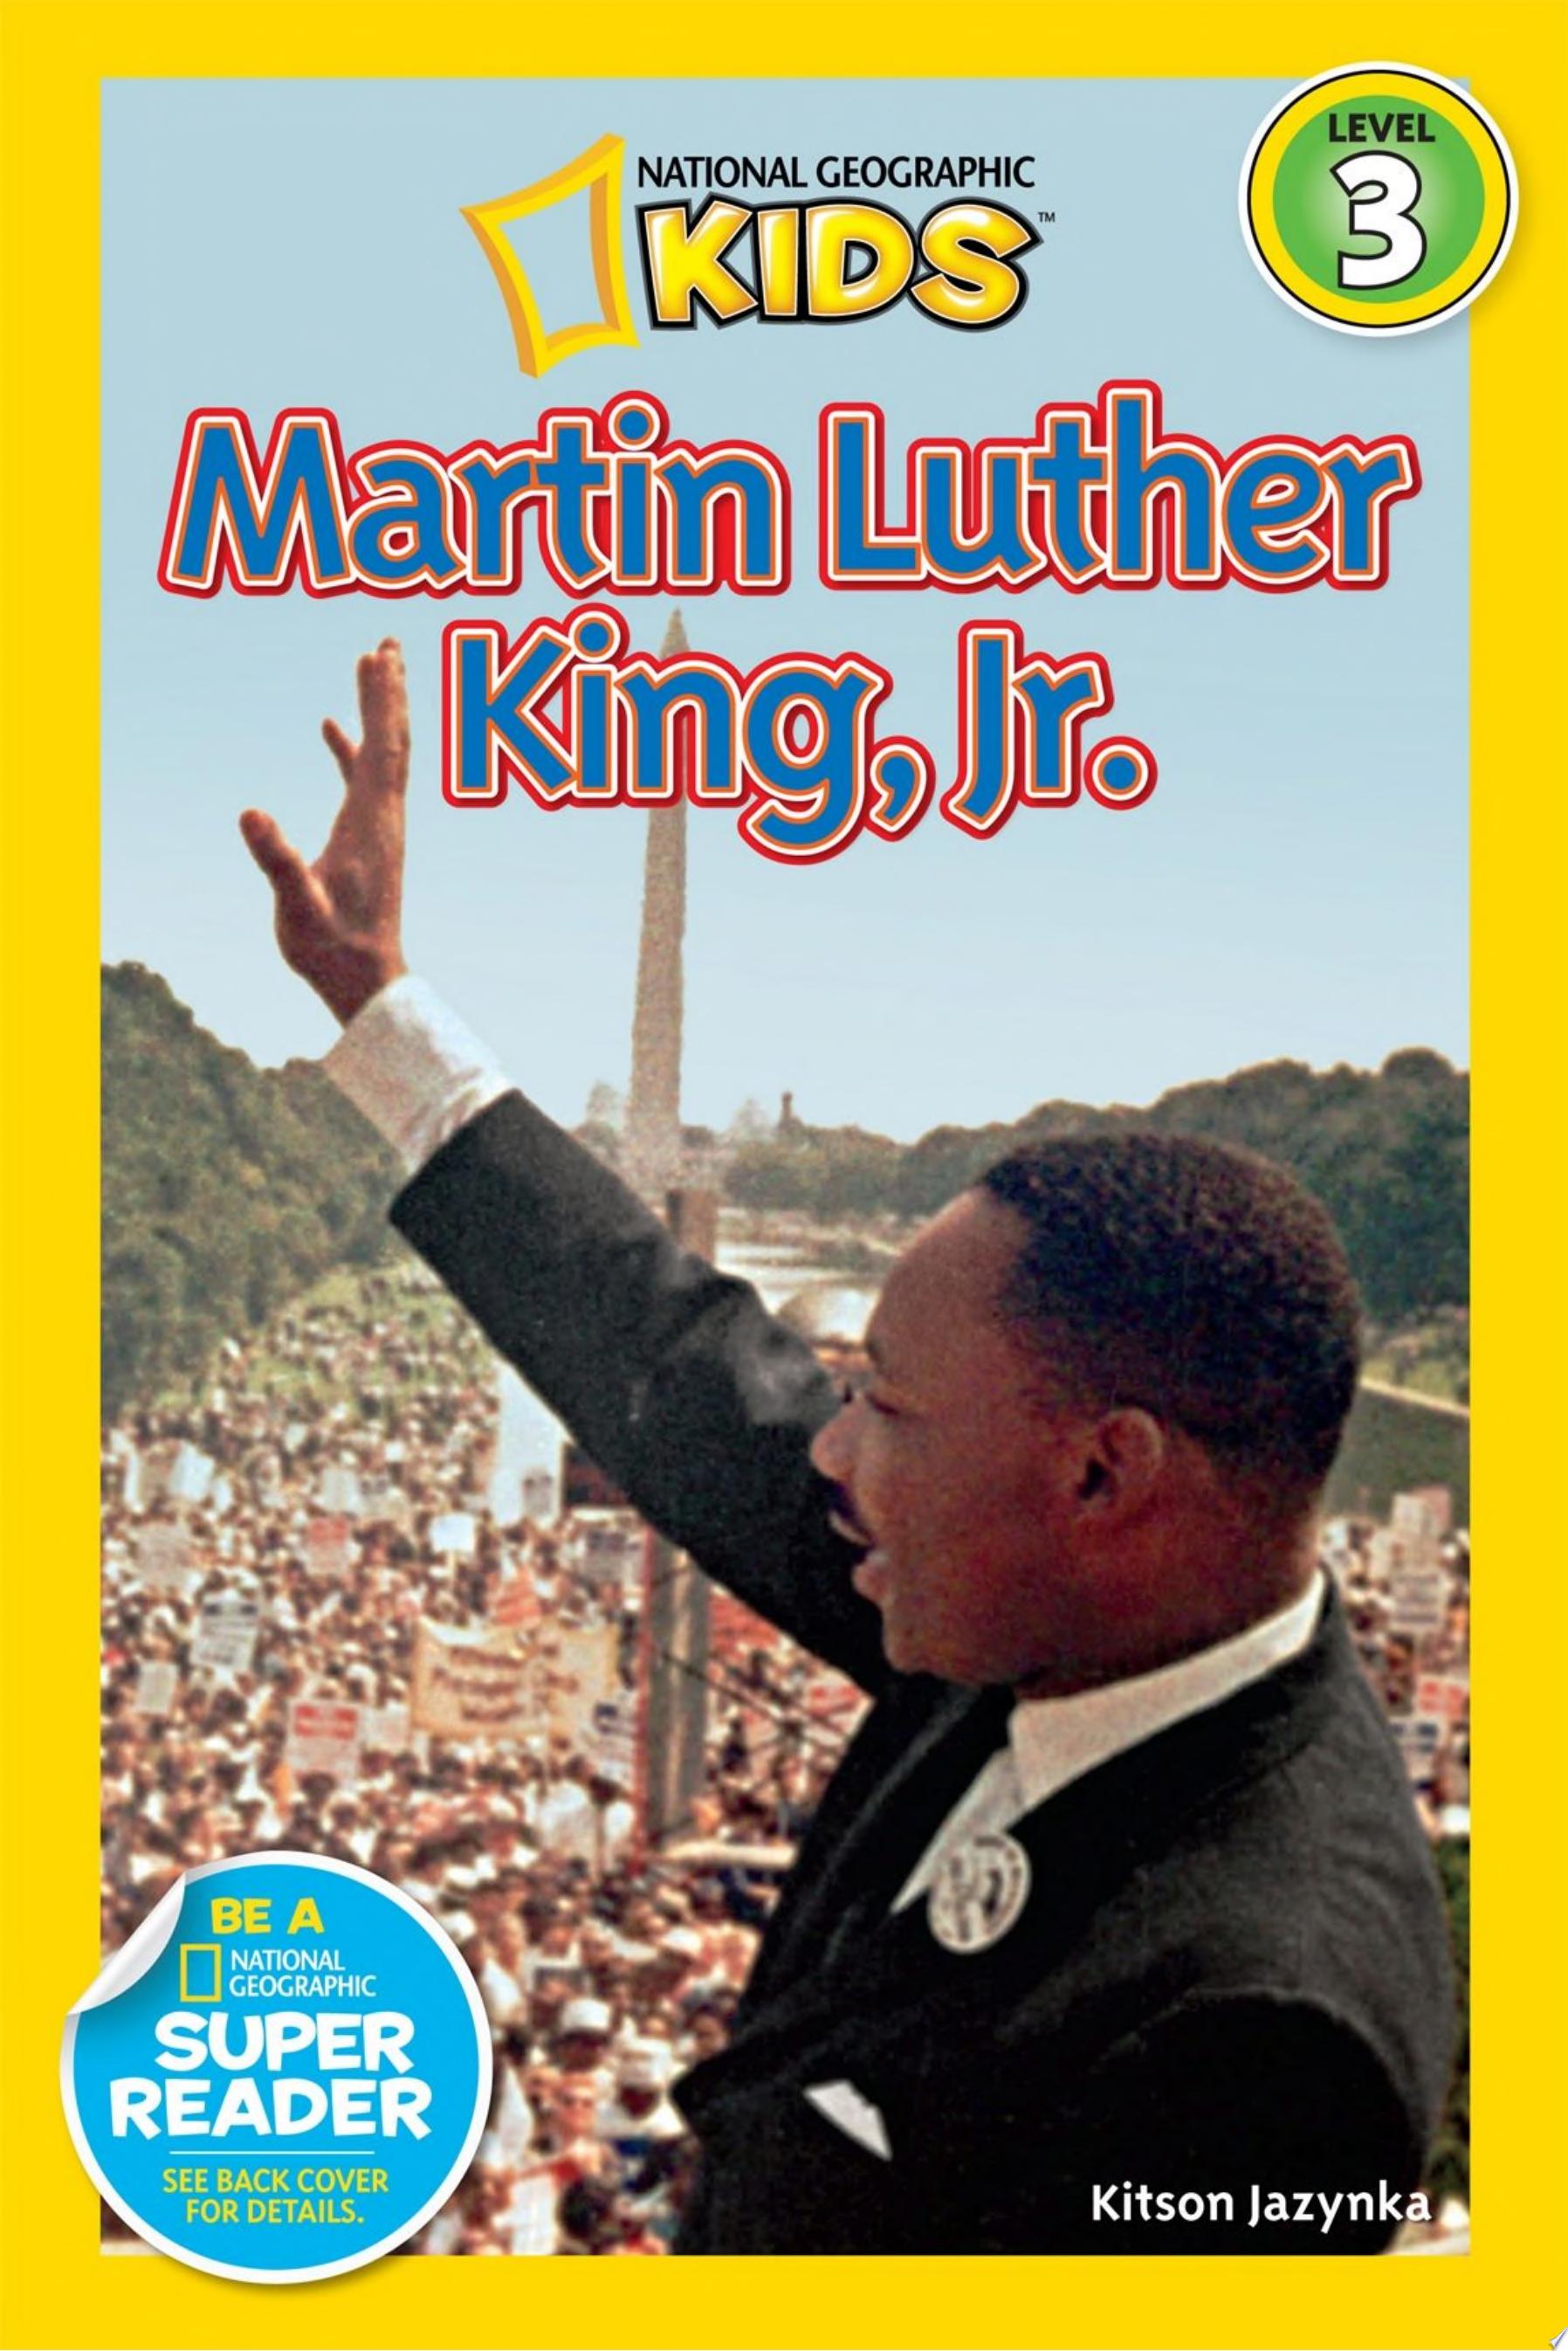 Image for "National Geographic Readers: Martin Luther King, Jr."